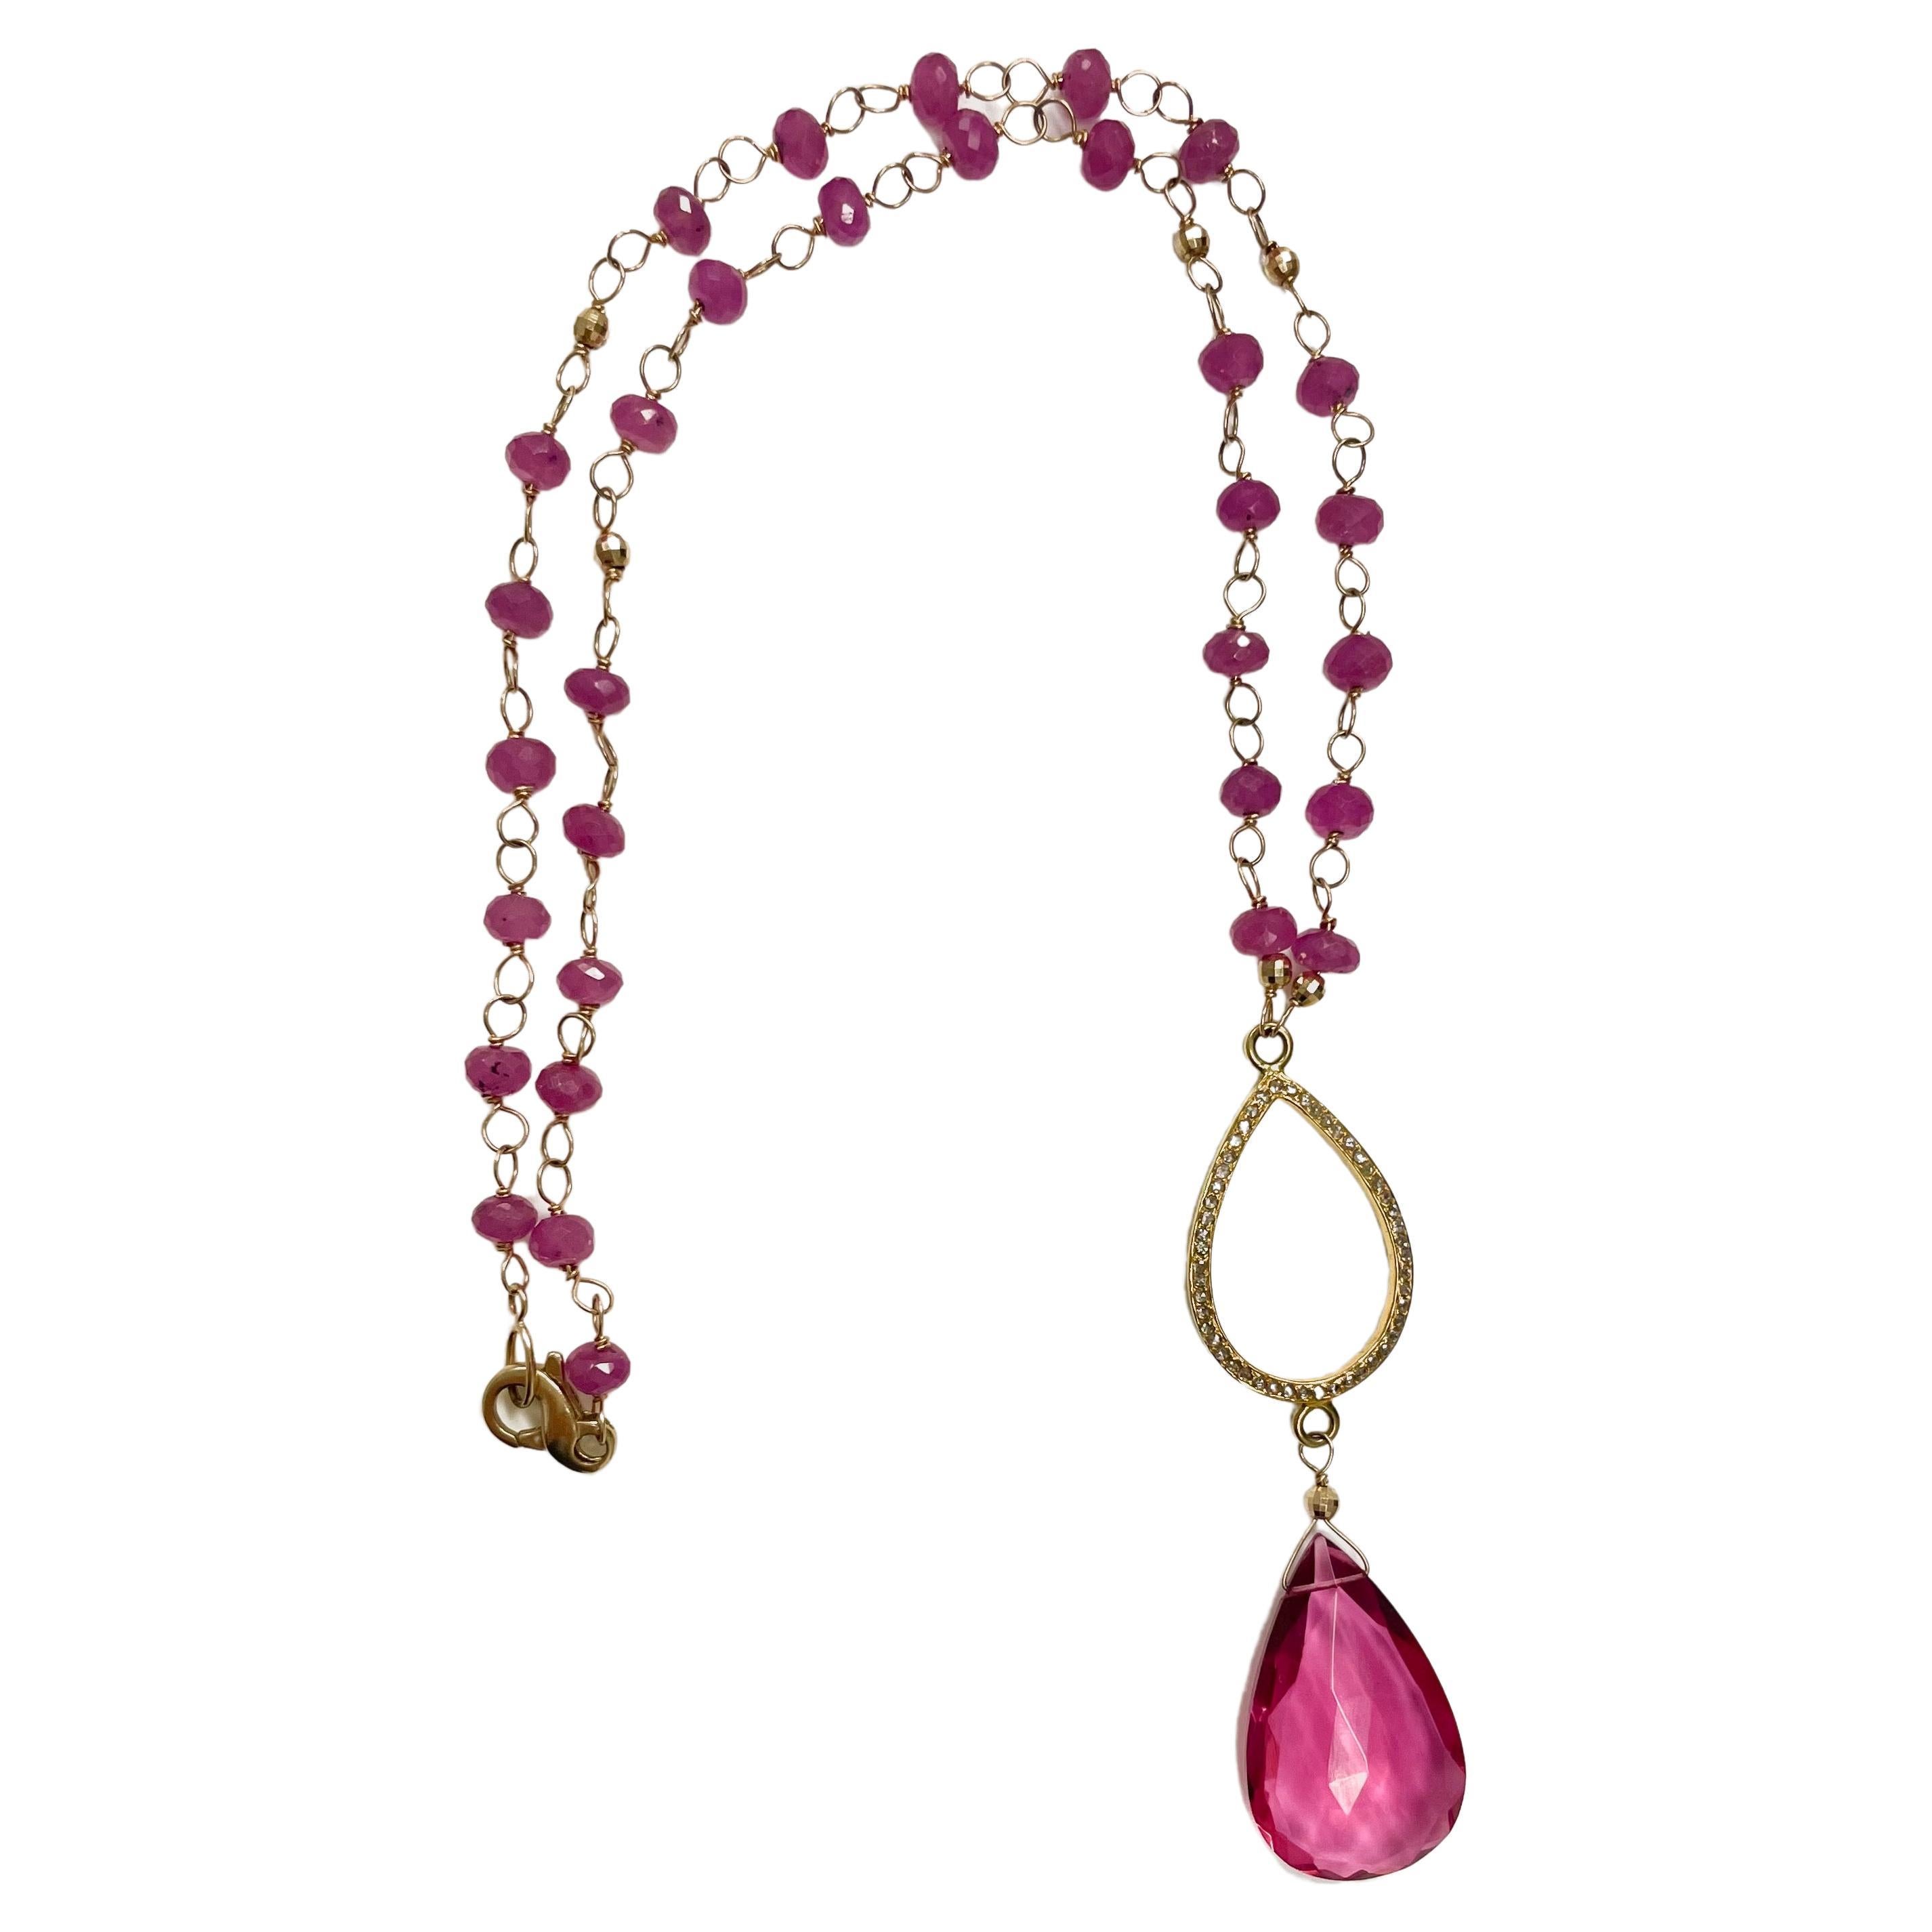 Description
Vibrant pink sapphire, accented with 14k faceted balls and adorned with a large hot pink quartz drop suspended from an 18k yellow gold open pear shape pave diamond piece.  The sapphires are separated with individually handmade links.